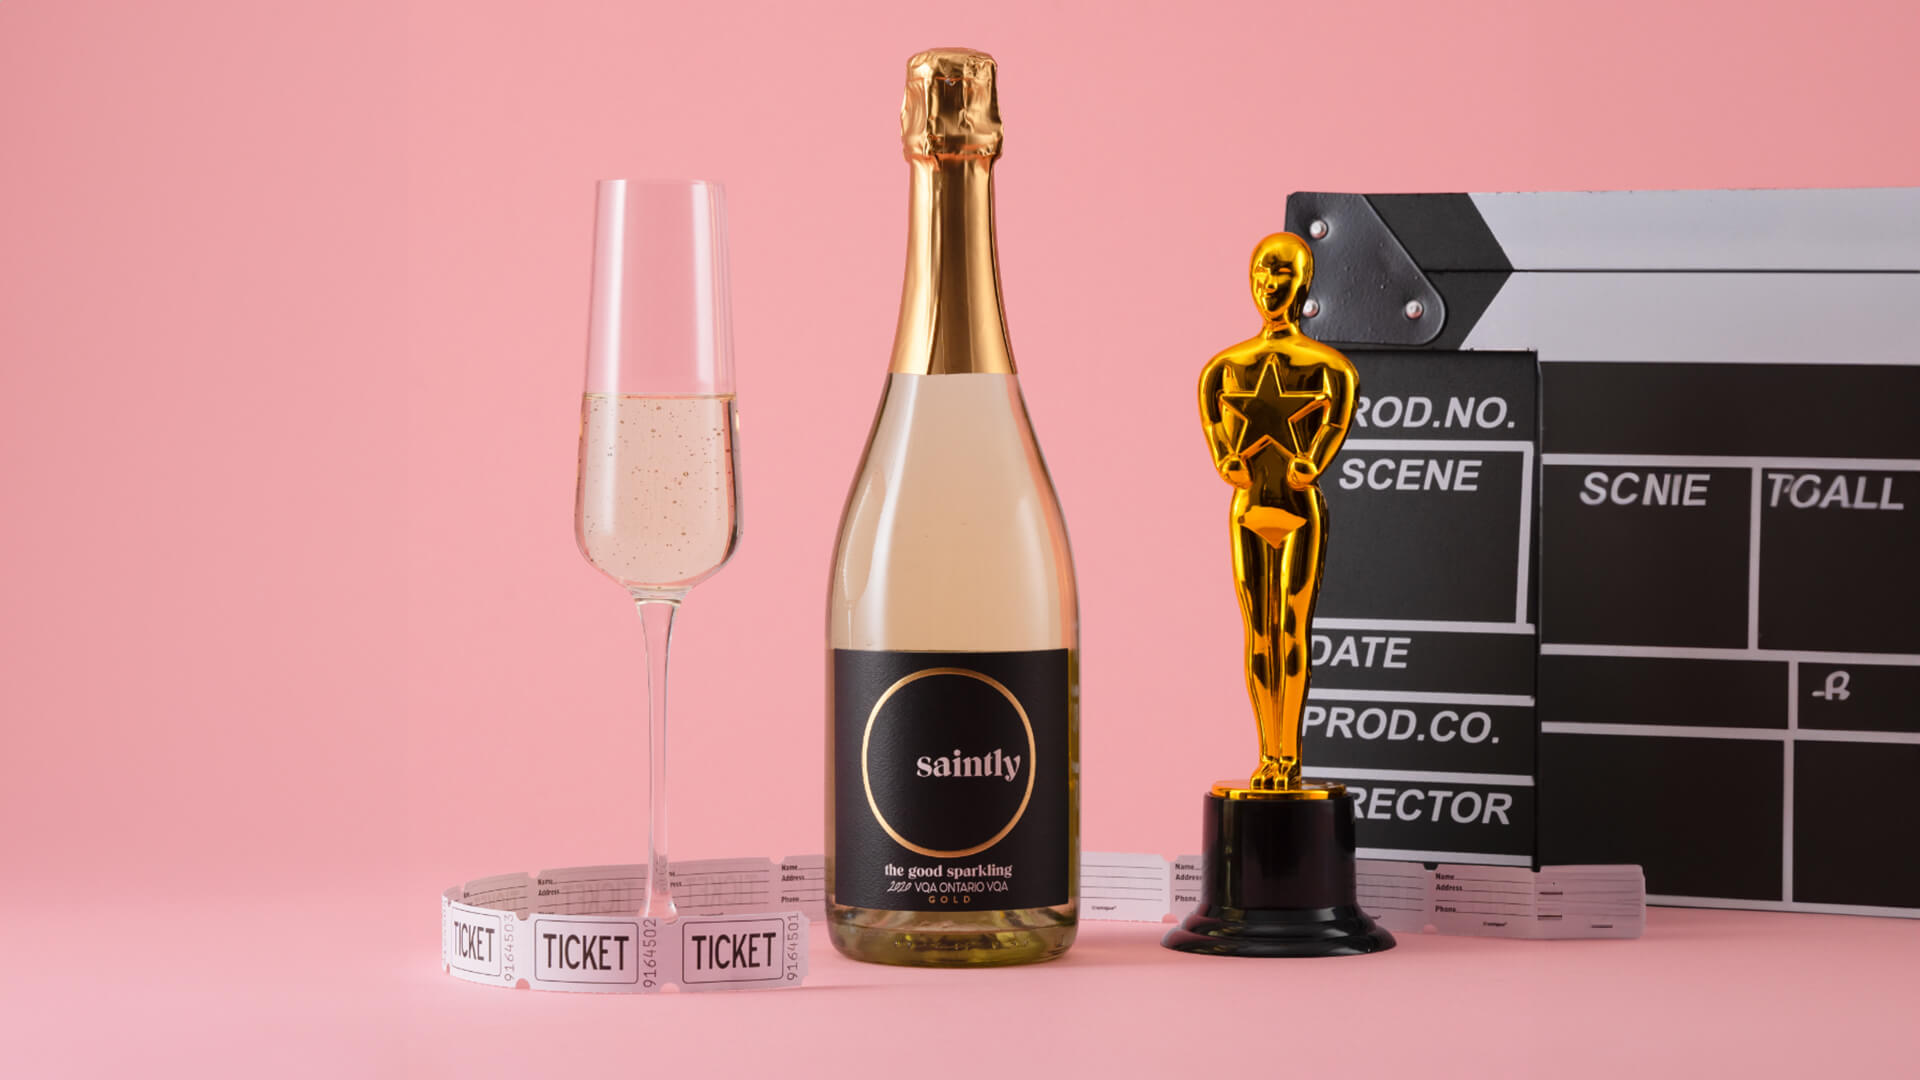 A bottle of Saintly the Good with an Oscar statue.